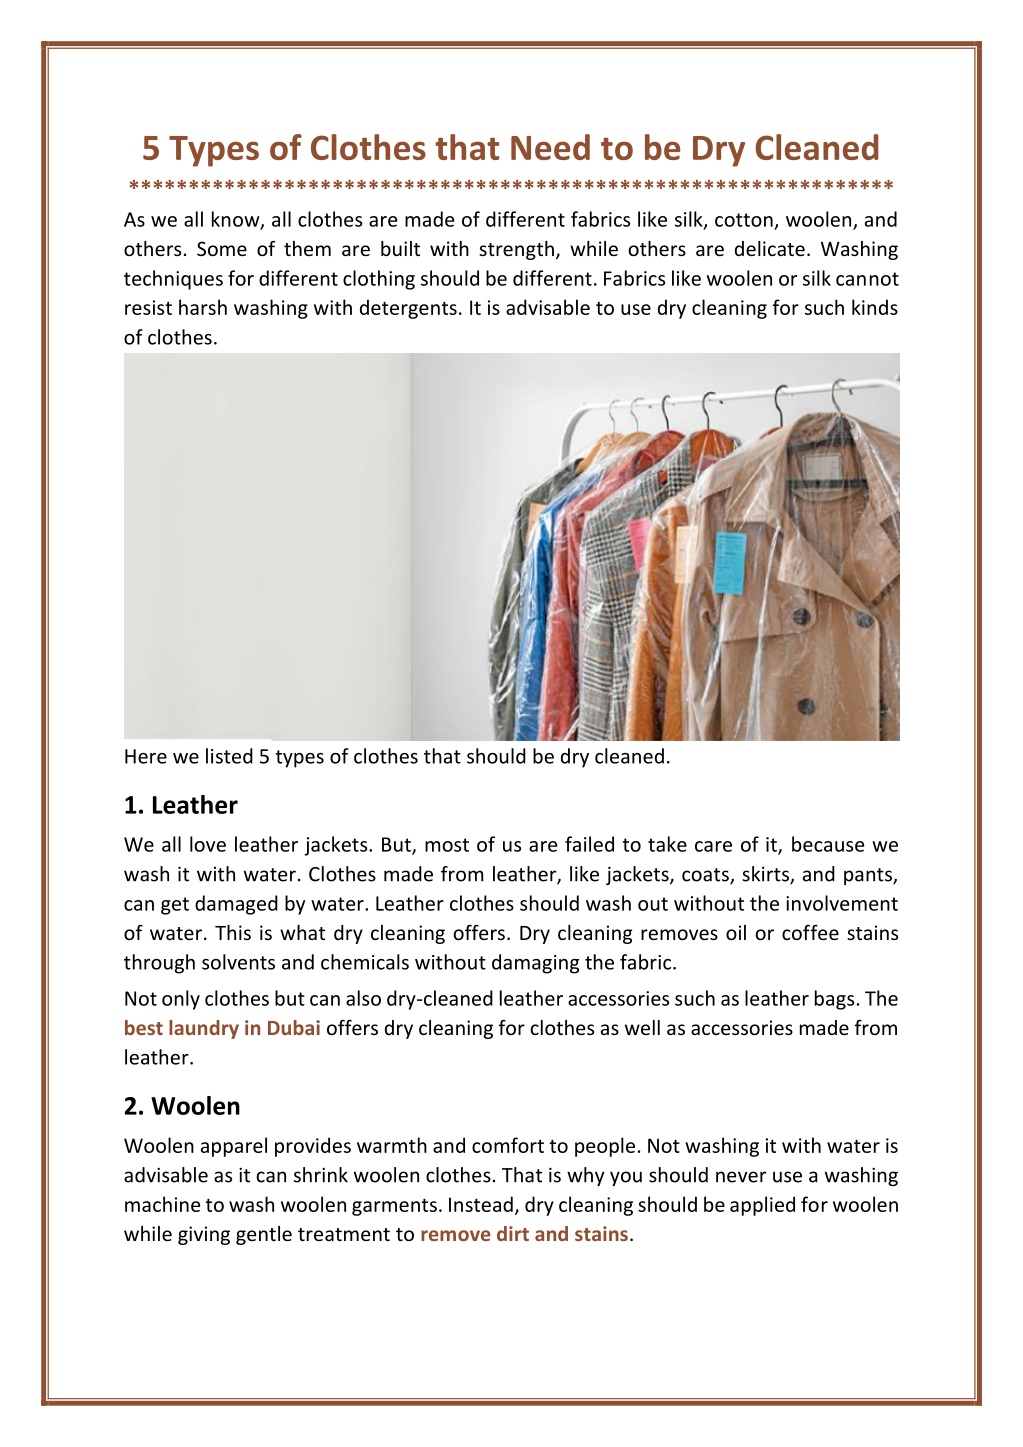 PPT - 5 Types of Clothes that Need to be Dry Cleaned PowerPoint ...